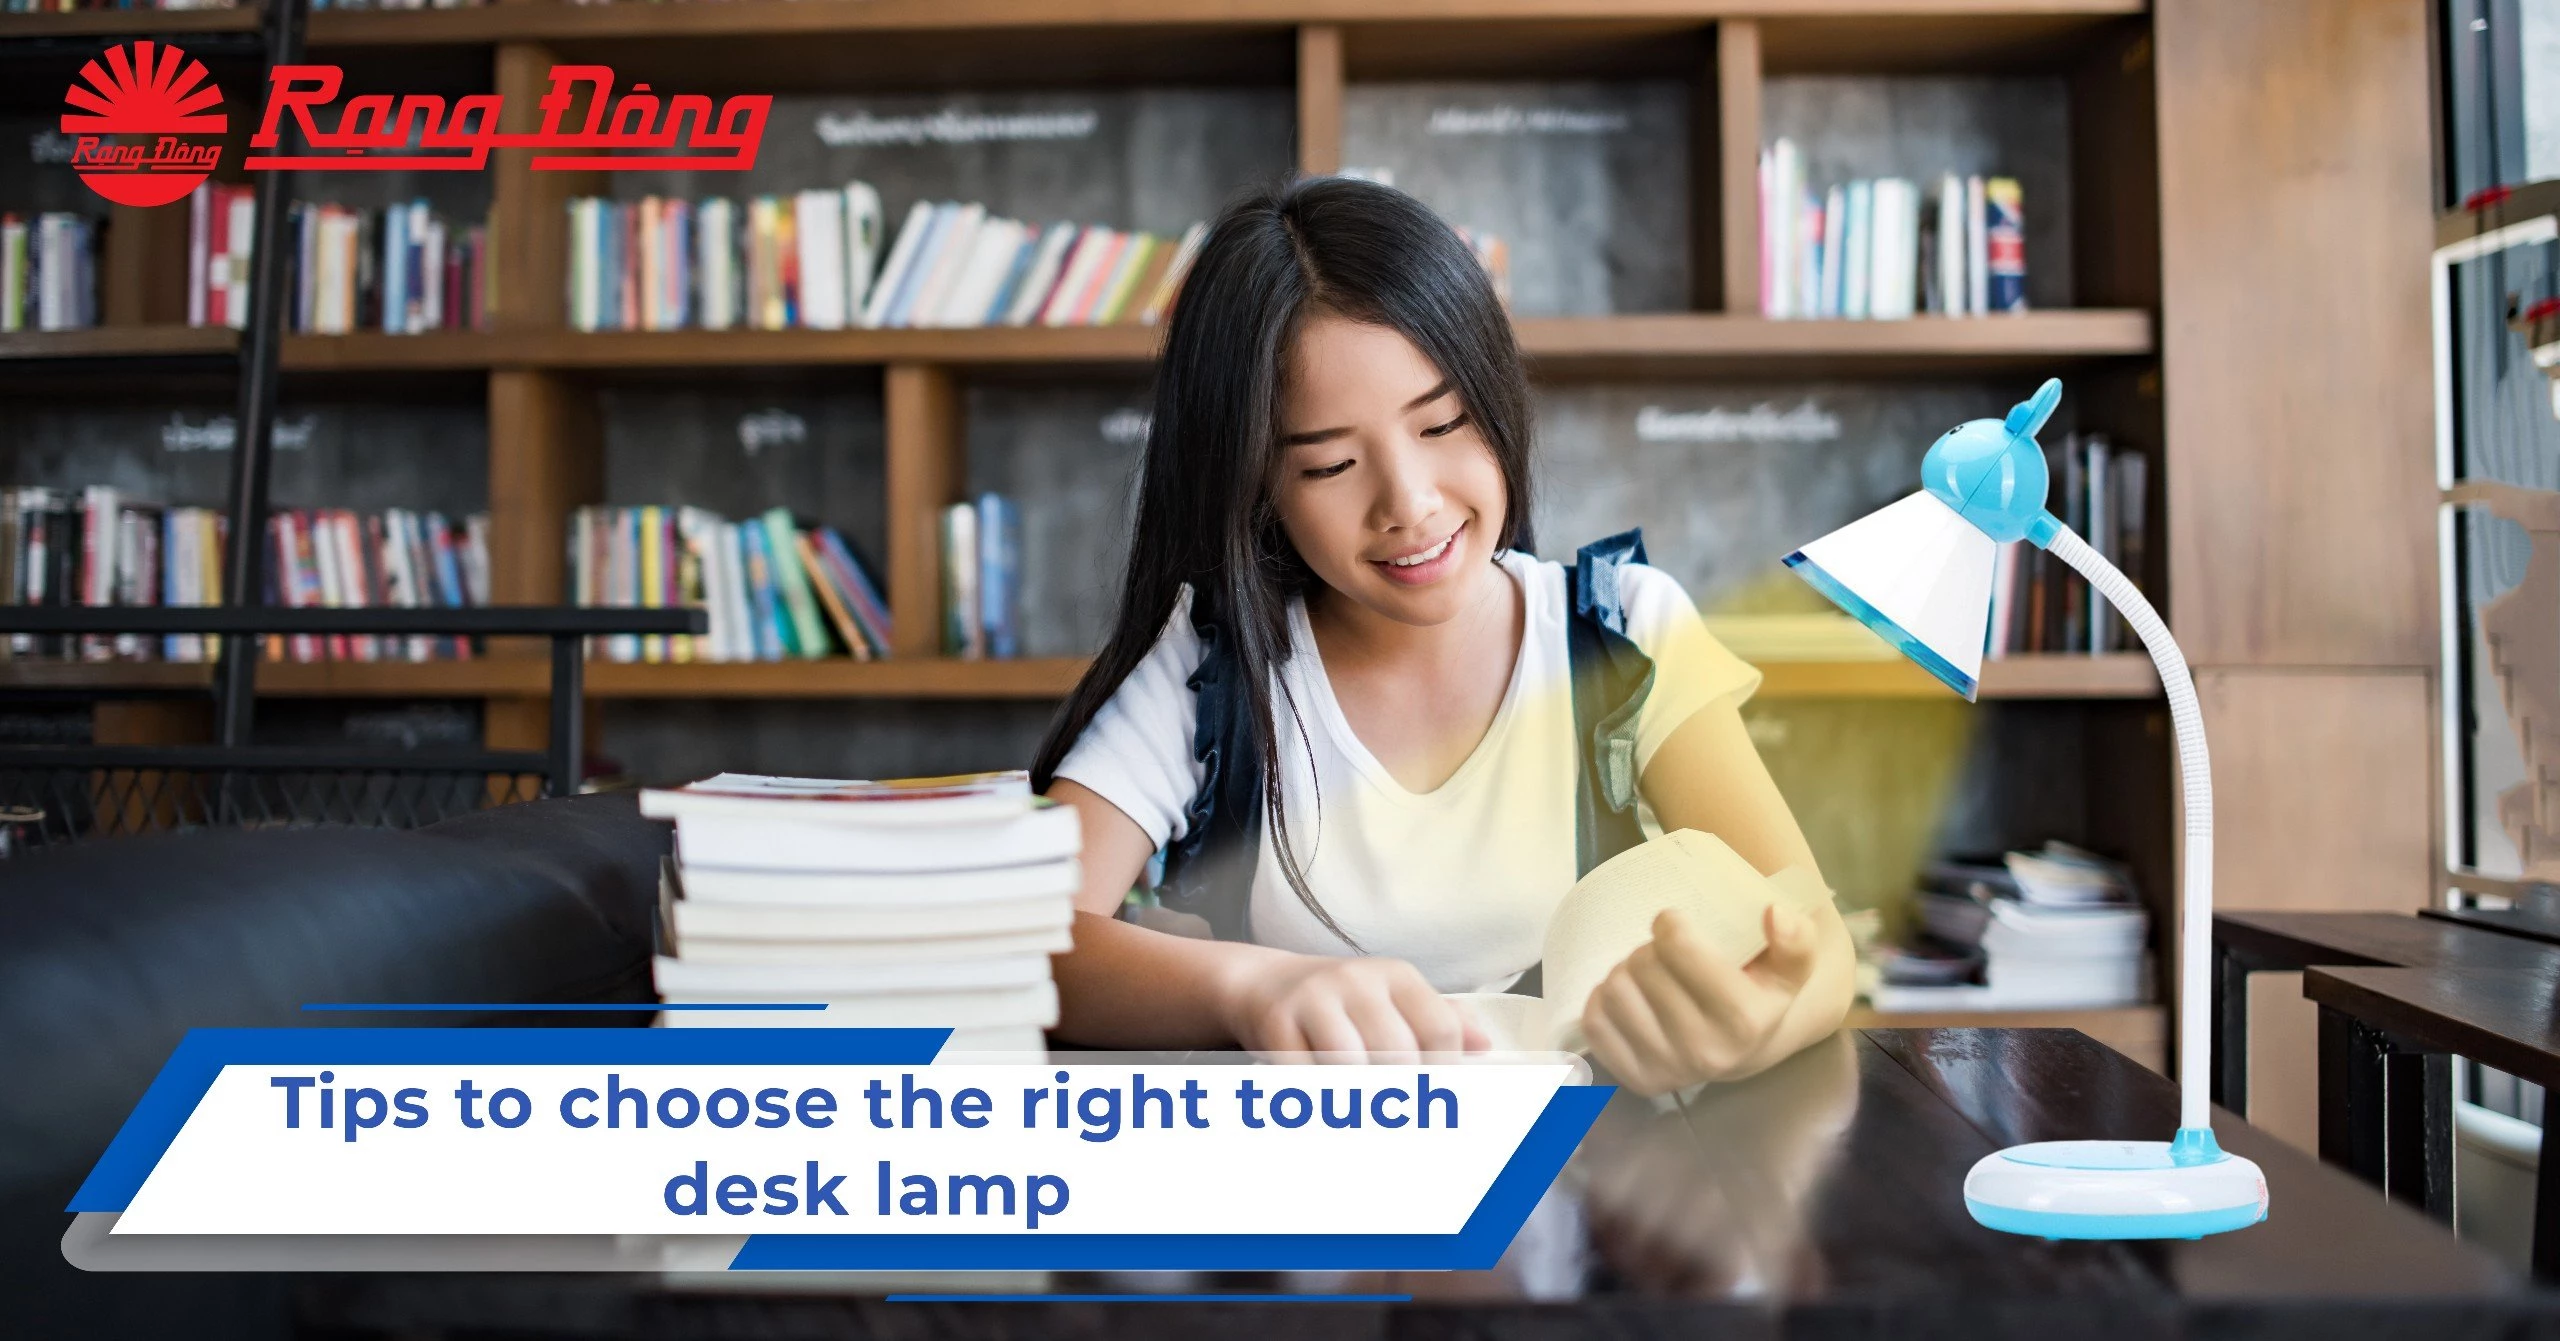 Tips to choose the right touch desk lamp